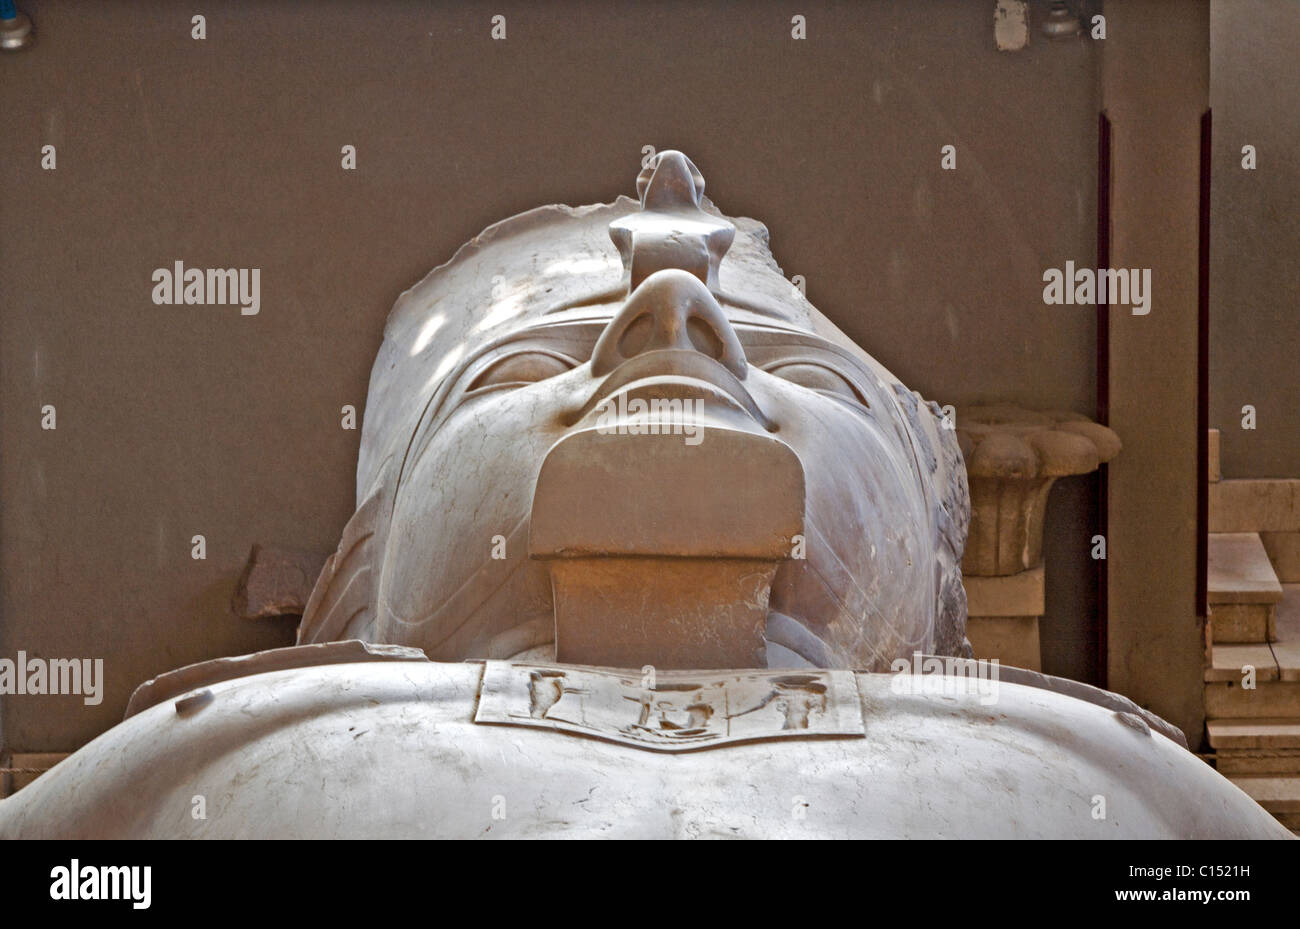 Pharaoh Ramses II remains stone cold and very still in the recline position in Memphis, Egypt. Stock Photo